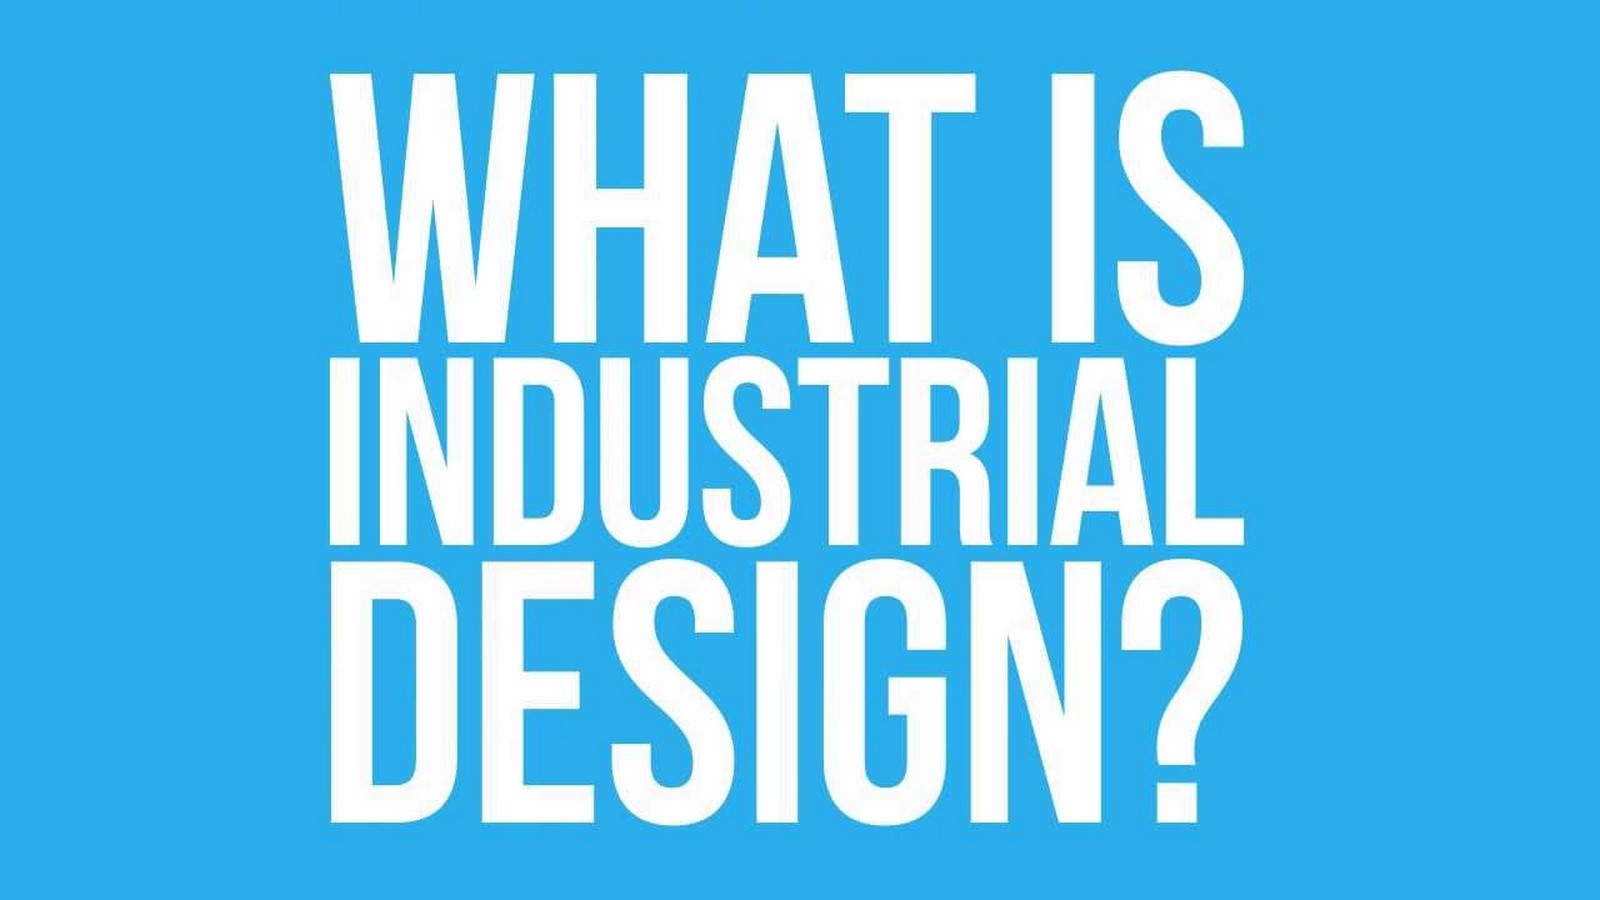 9 Masters options for students interested in Industrial Design - Sheet1